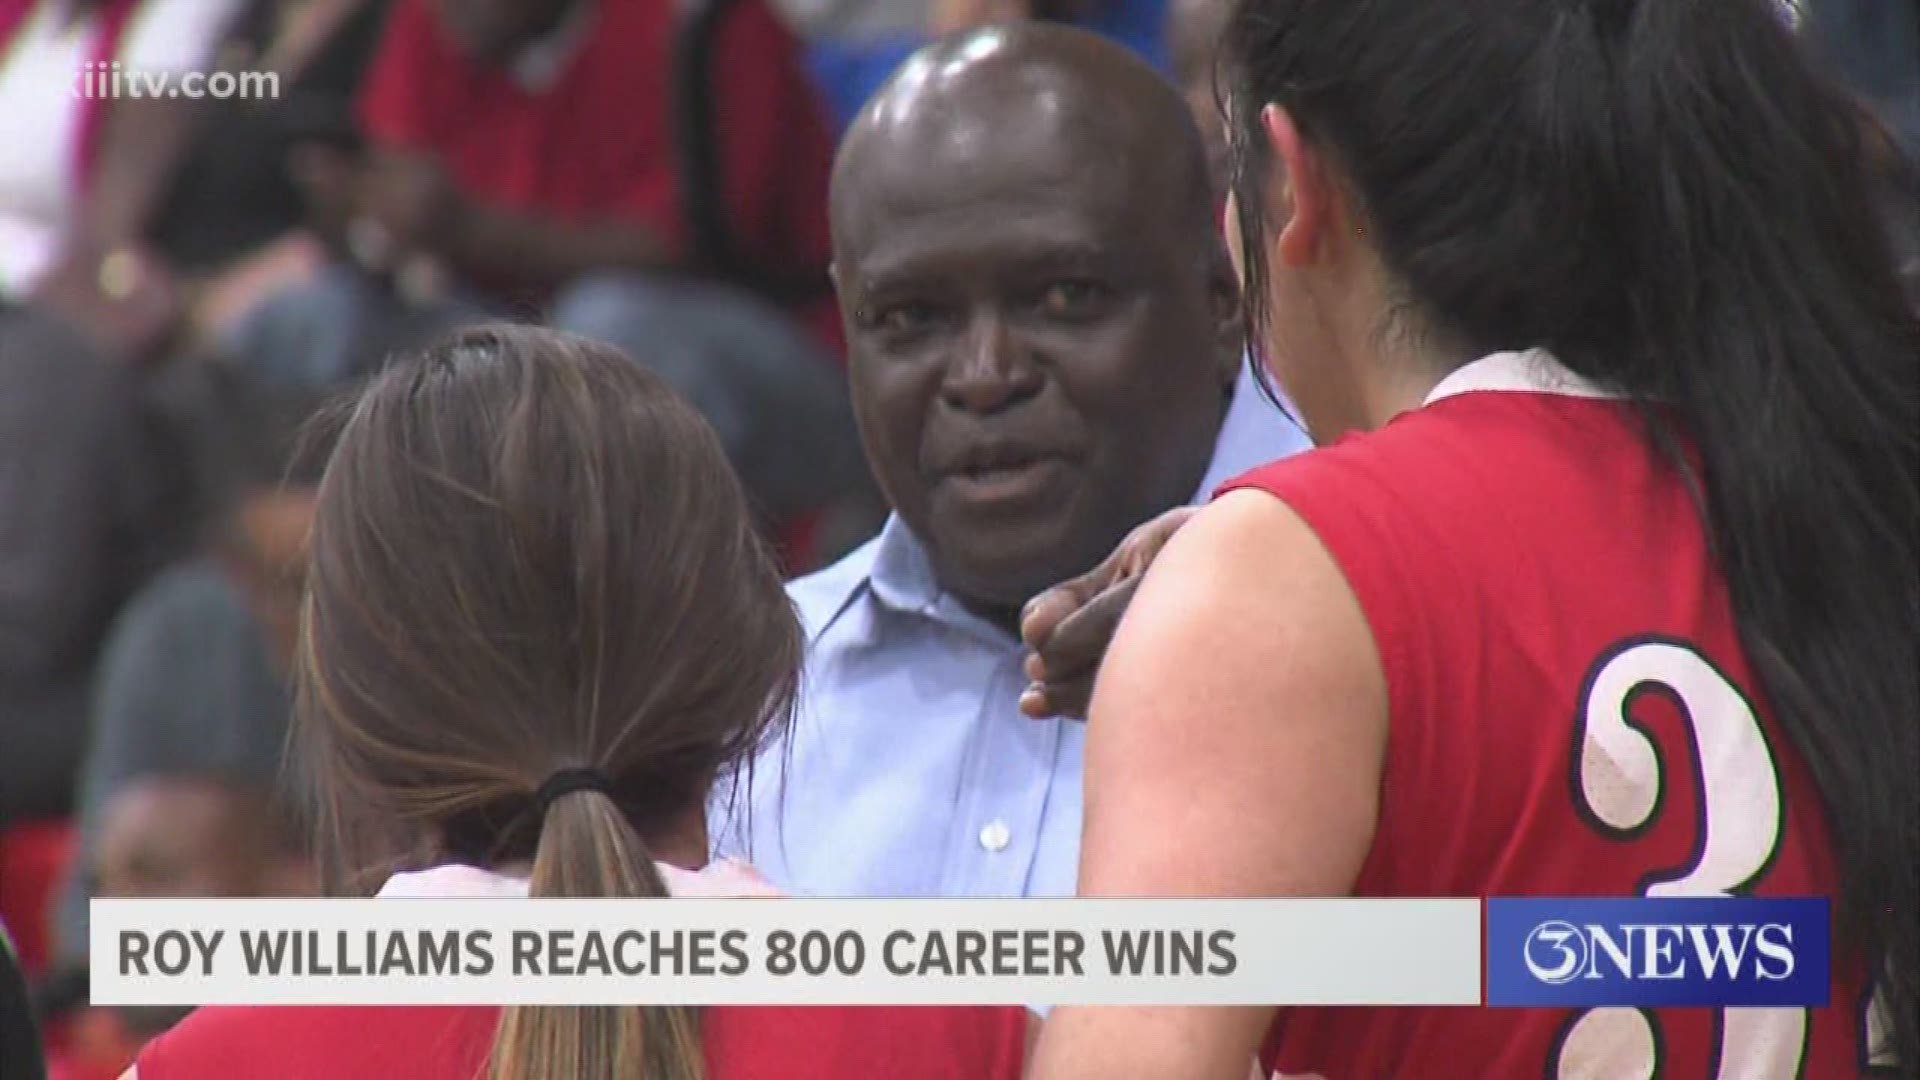 Williams picked up career win number 800 in the tournament that is named after himself.